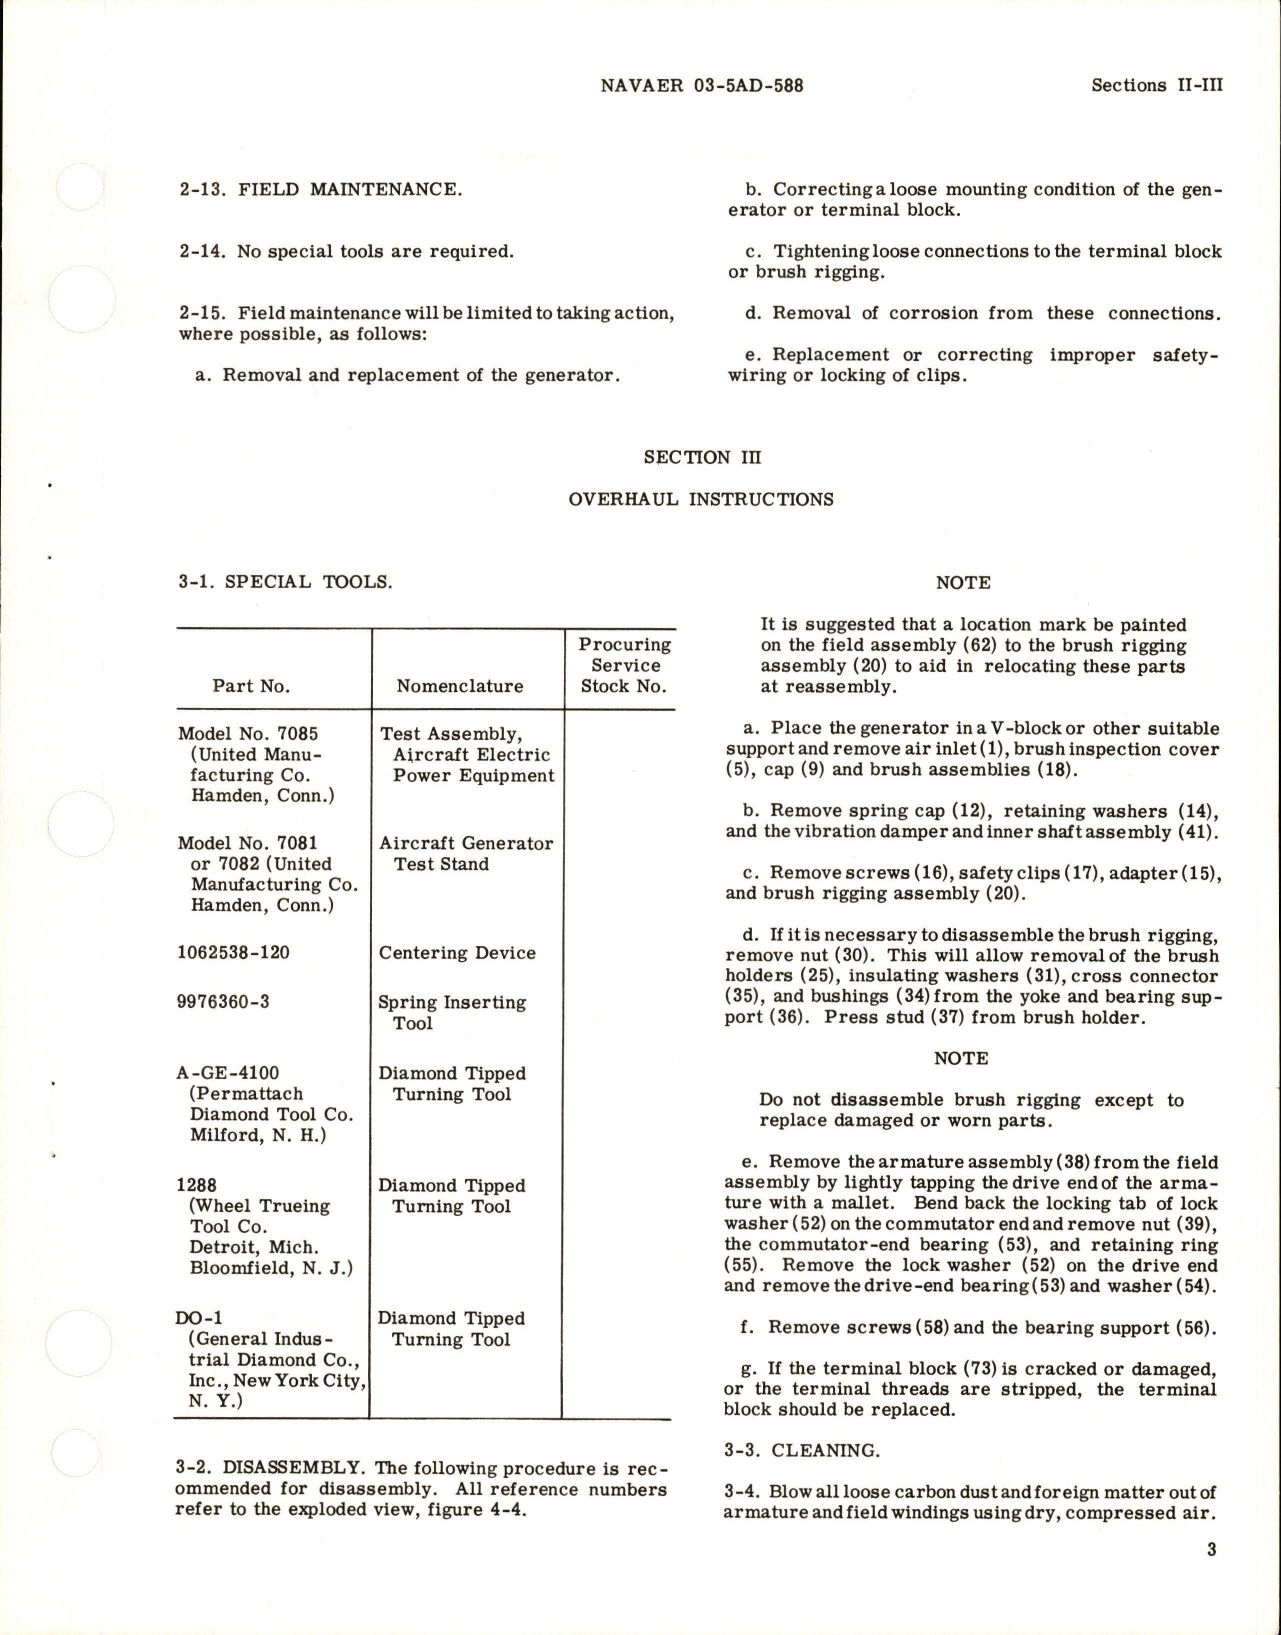 Sample page 7 from AirCorps Library document: Service and Overhaul Instructions for DC Generator - Models 2CM76C4, 2CM76C4A, 2CM76E4, 2CM76E4C, and 2CM76E5 